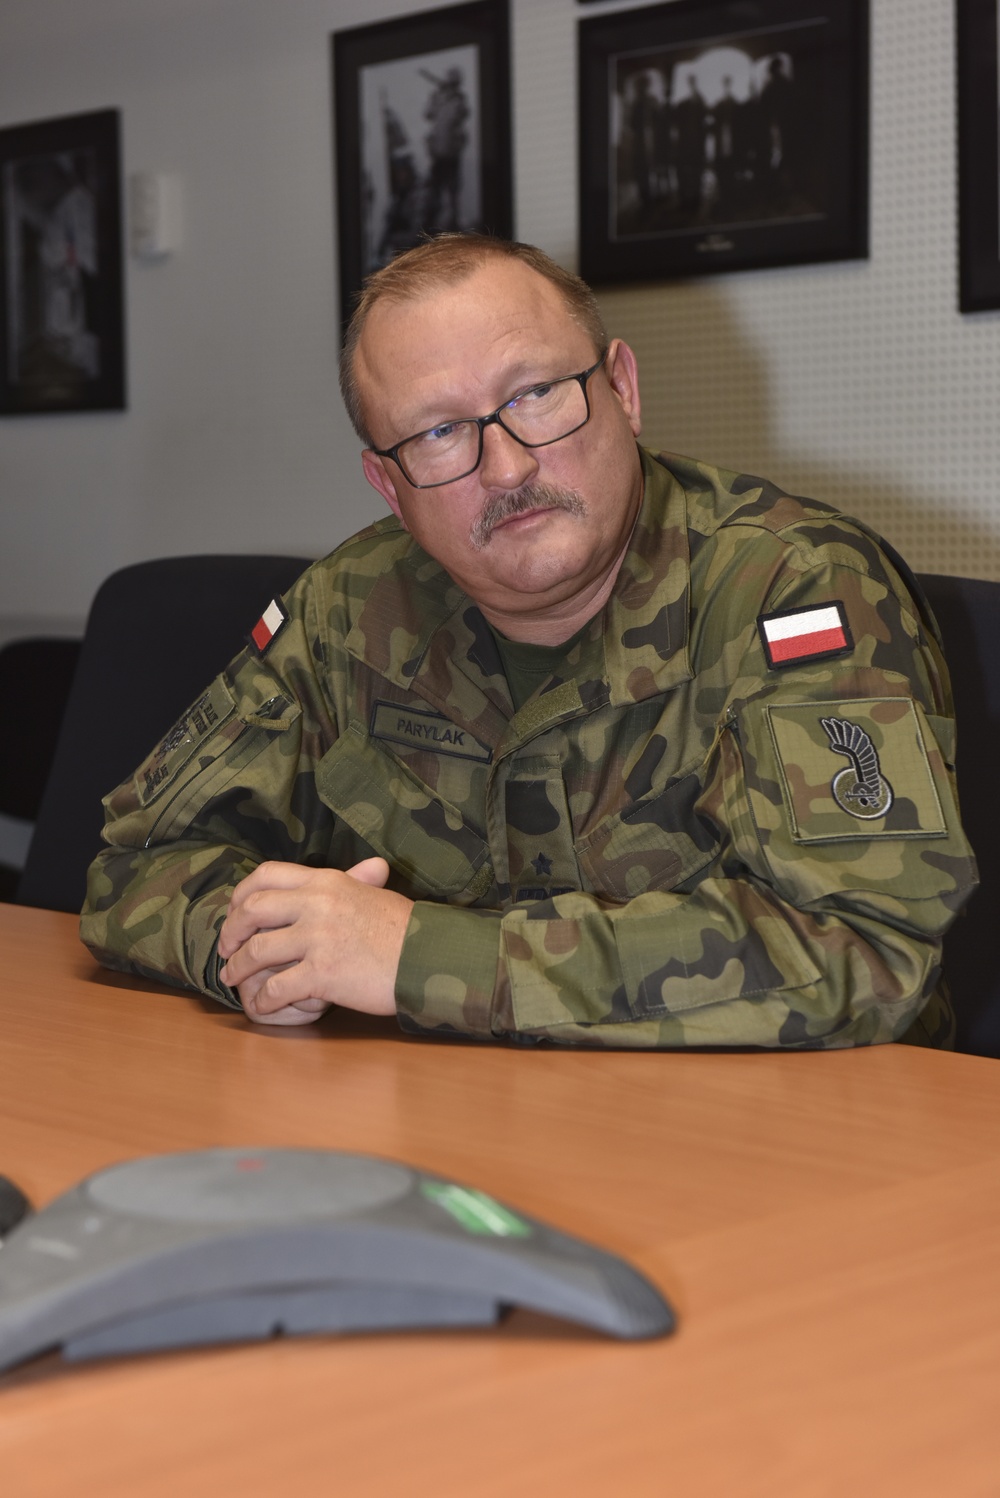 Brig. Gen. Dariusz Parylak discusses his experience in the High Command during exercise Combined Resolve XII.